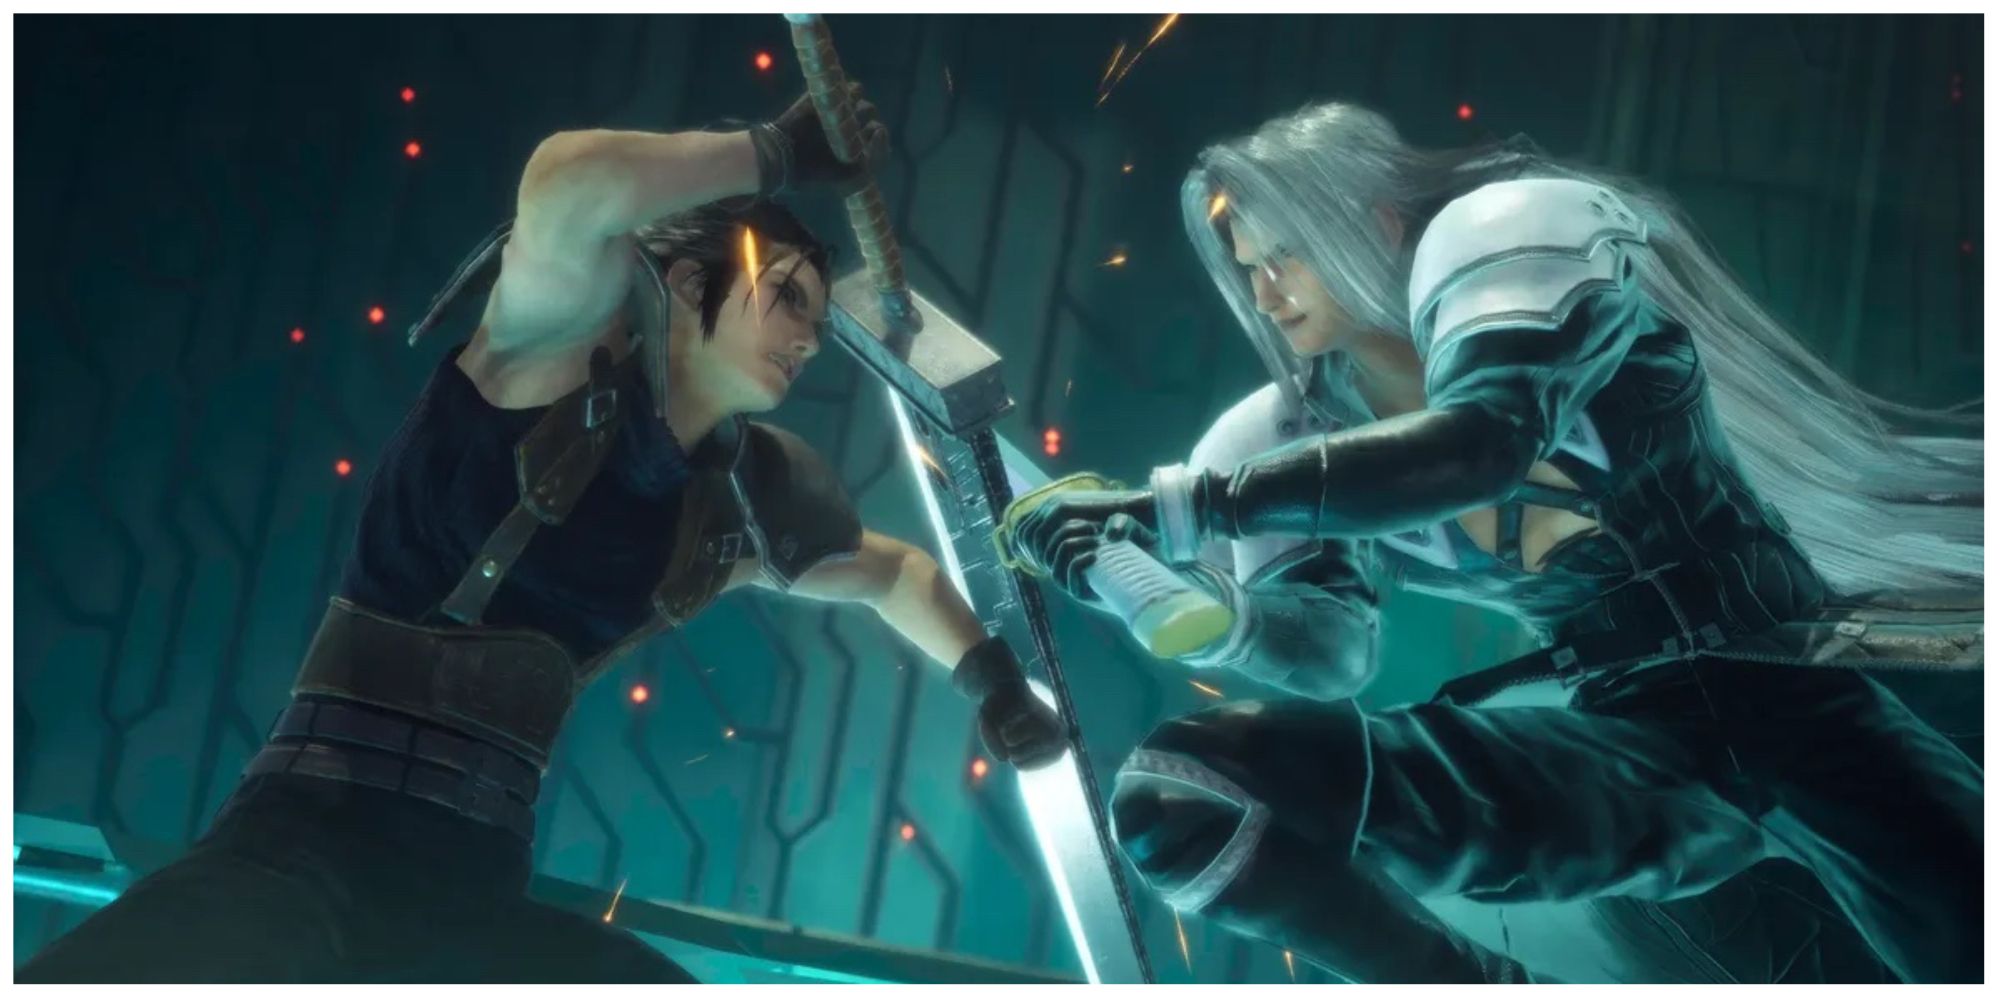 Zack and Sephiroth in Crisis Core: Final Fantasy 7 Reunion